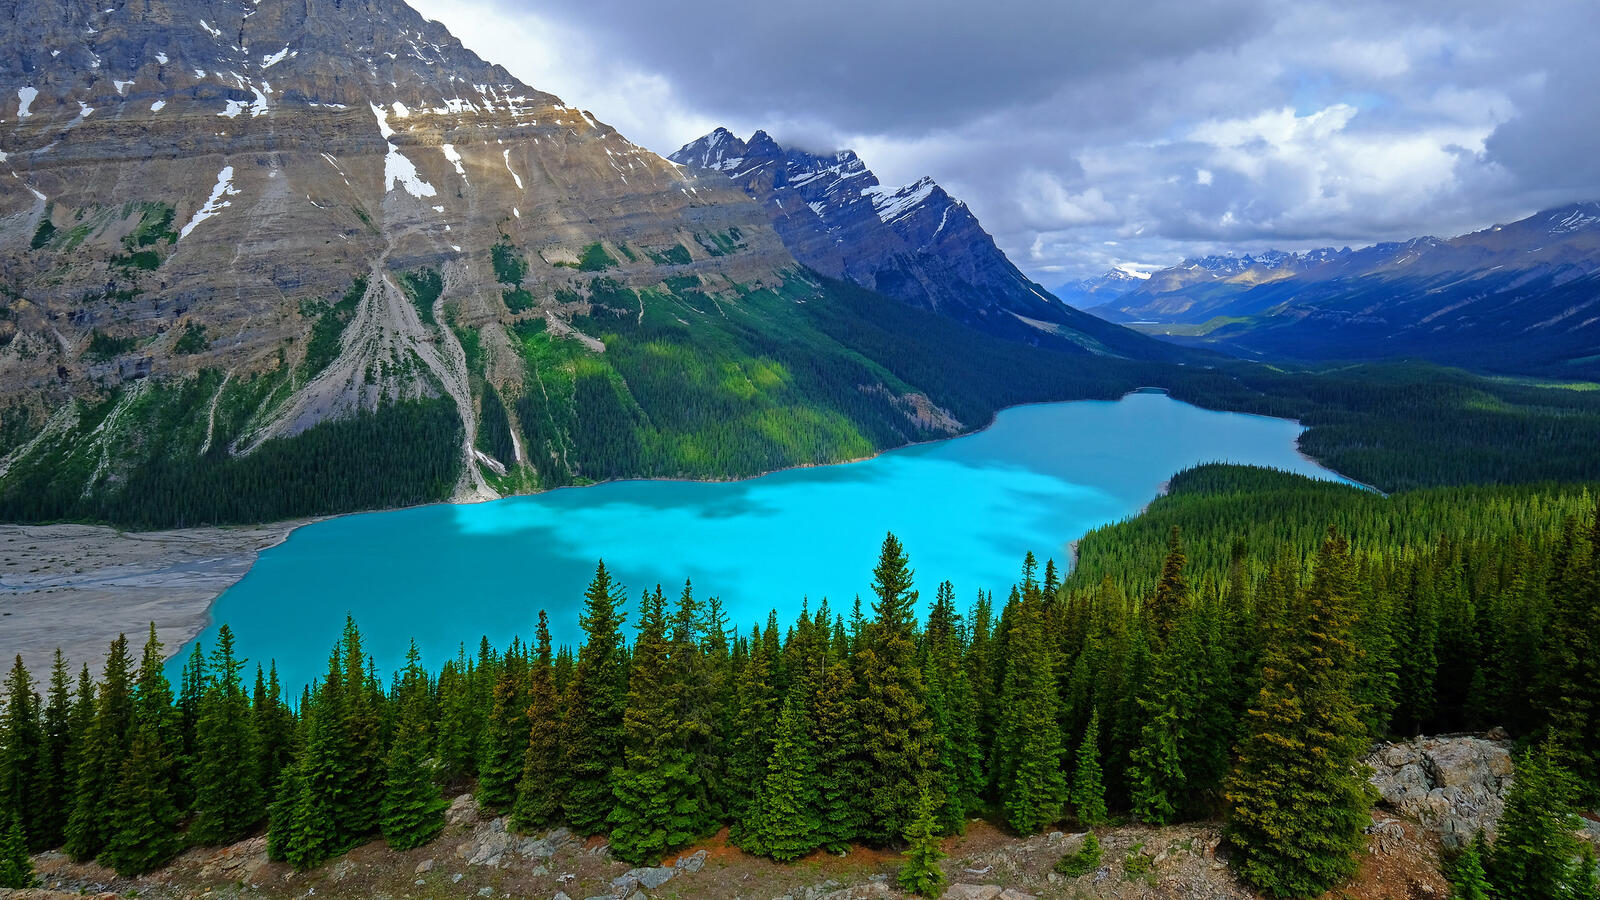 Wallpapers the forest isPeyto Lake and lakes Landscape Banff National Park on the desktop